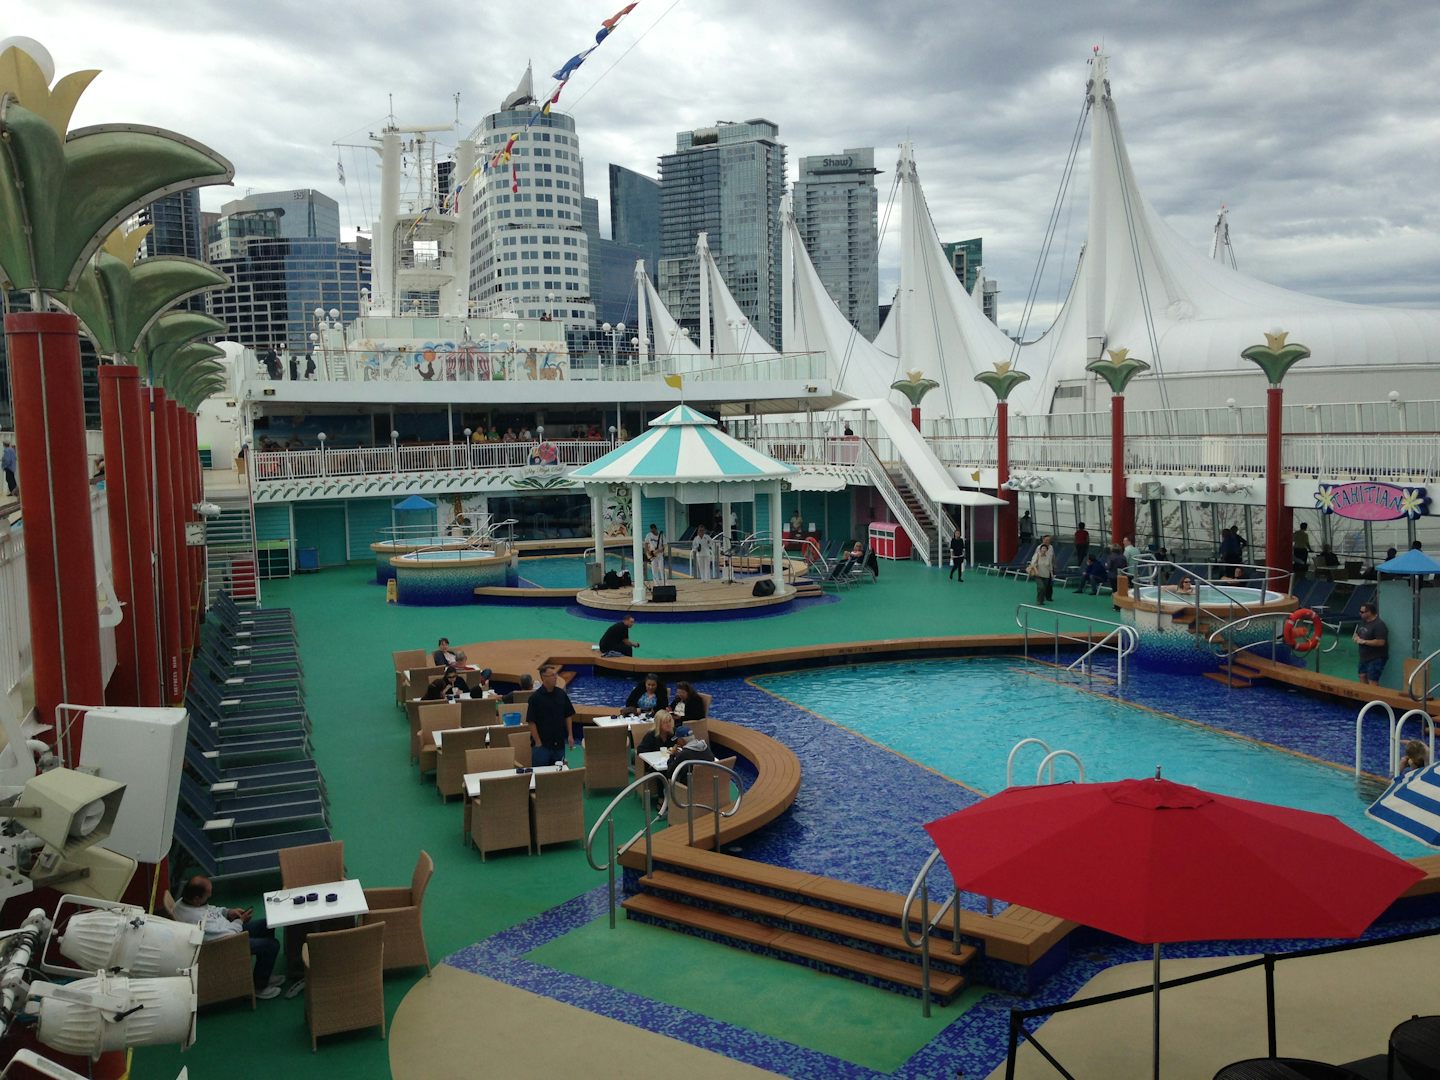 Pool area before sail away BBQ party